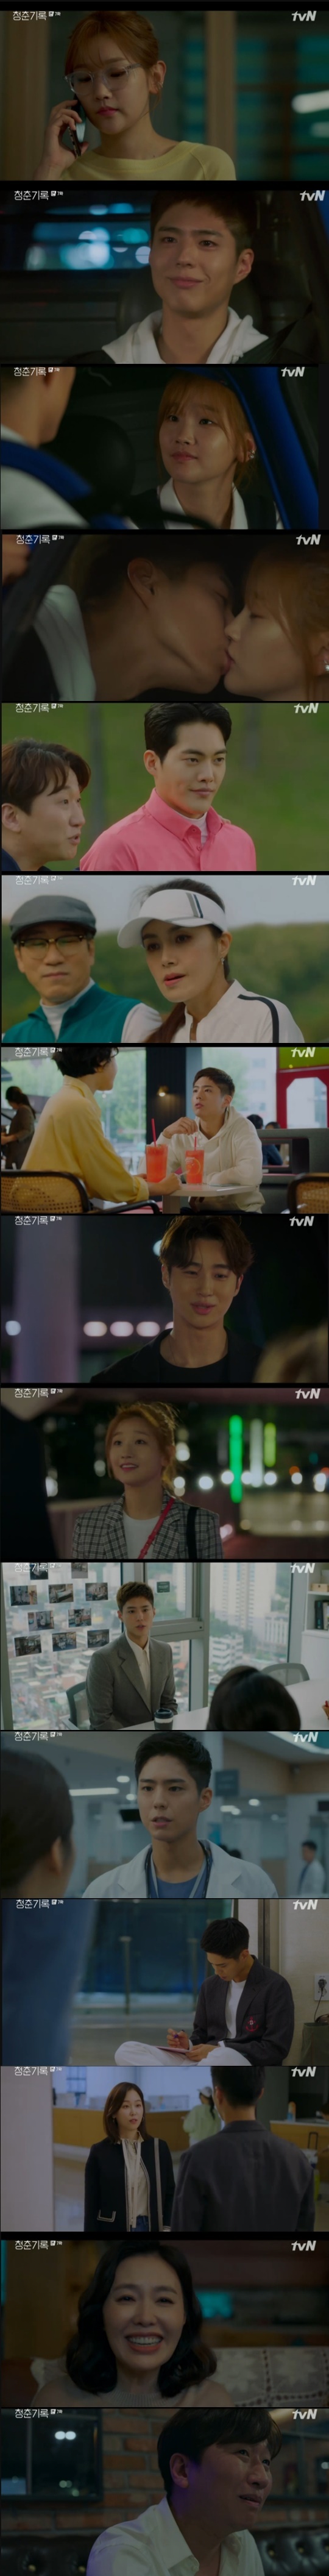 Park Bo-gum has been a true actor, digesting the Drama Character properly.On this day, I taught my junior to make up, and the pearl designer who saw it said to my junior, Do you want to be like An Jeong-ha? Do not you know the reputation of An Jeong-ha in the shop?Lee Min-jae (Shin Dong-mi) visited the beauty salon where An Jeong-ha worked and was distressed by him, saying, Have you ever seen a manager who harasses artists?My sister has a special charm, Min-jae said, you make her pretty.I know youre dating, he said. If she loves you, she loves you to the end of the universe. Thats not a good sound to hear, said An Jeong-ha.I love the other woman to the end of the universe, Lee Min-jae said, I loved the end of the universe without 0.01g.Is it too cool? and smiled, saying, Yes, and asked, You should comfort him a little.When I returned home, I called Sa Hye-joon, who was stable, and I knew that Sa Hye-joon was shedding tears, but pretended not to know and suggested, Lets play with me.Sa Hye-joon met An Jeong-ha and kissed her on a date in the park, and Hye-joon looked at An Jeong-ha who was about to get in the car and said, I want to do something, but I have to get permission from you.When Ahn Jeong-ha allowed him to kiss, Sa Hye-joon kissed him again, saying, If you want to do it, you can do it anytime. Me too.Steaming video (Shin Ae-ra) met Lee Tae-soo (Lee Chang-hoon) while playing golf with her husband.In the past, Steaming video asked Lee Tae-soo to terminate the contract of Won Hae-hyo (played by Byun Woo-suk) saying, Are you a brute?Lee Tae-soo explained, My mother, how much money do you give me such a disgrace? Lee Young said, My mother? I can not work with someone who can not choose a word.Lee Tae-soo ran to Steaming video first and greeted him, followed by Park Do-ha (Kim Gun-woo), showing off his good management.Lingnan (Park Soo-young) confessed that he hit Han Ae-sook (Ha Hee-ra) on the cheek. So Ae-sook said, So you came in after drinking?You dont want to know where shes going and where shes going? said Lingnan, who expressed his affection to Sa Kyung-joon (Lee Jae-won) What if I miss you when you move?If you want to see it, you can come to play, Kyung-joon said, but where did Hye-joon go, and I have to move tomorrow.He was disappointed to hear that his reputation was bad at the beauty salon from a stable junior. Won Hae-hyo picked up An Jeong-ha before going to the filming scene and asked her regards when she looked at his complexion.When he complained that life is not a flower road but a construction board, Won Hae-hyo said, But our Hye-joon is capable because he sees the construction board laughing.An Jeong-ha said she was competent.When Ahn left work before the filming was over, Haehyo ran to Ahn and said, Goodbye, I have to finish today.Thank you today, he said, turning away. Dont go, Haehyo said to himself.I was offered a supporting role as a doctor, said Sa Hye-joon, who went to audition for the drama Gateway on the station.Im going to shoot next week after reading. You just have to look at Lee Hyun-soo (Seo Hyun-jin), and youre going to be in a hospital.When asked if he had any experience in the audition for Drama, Sa Hye-joon said, I tried to play a meat house and a bodyguard.I was cast, I think, because I didnt show Acting, said Sa Hye-jun, who immediately ran to An Jeong-ha when he heard that she was cast on Gateway.If you showed me Acting, it was all dead, said Sa Hye-joon, Thank you for having you at this moment.Sa Hye-joon gave NG because of difficult medical terminology on the filming site of Drama, and Lee Hyun-soo told Sa Hye-joon, I am really good at God with my juniors.When Lee Hyun-soo was studying the script without returning to the film, he said, Hye Jun-ah, go home and wash and relax and simulate it into your head.Fuji is the one who is trying to bully him because of the next god, and we should not let him go. And next time, he said, Tell him you are my sister. 